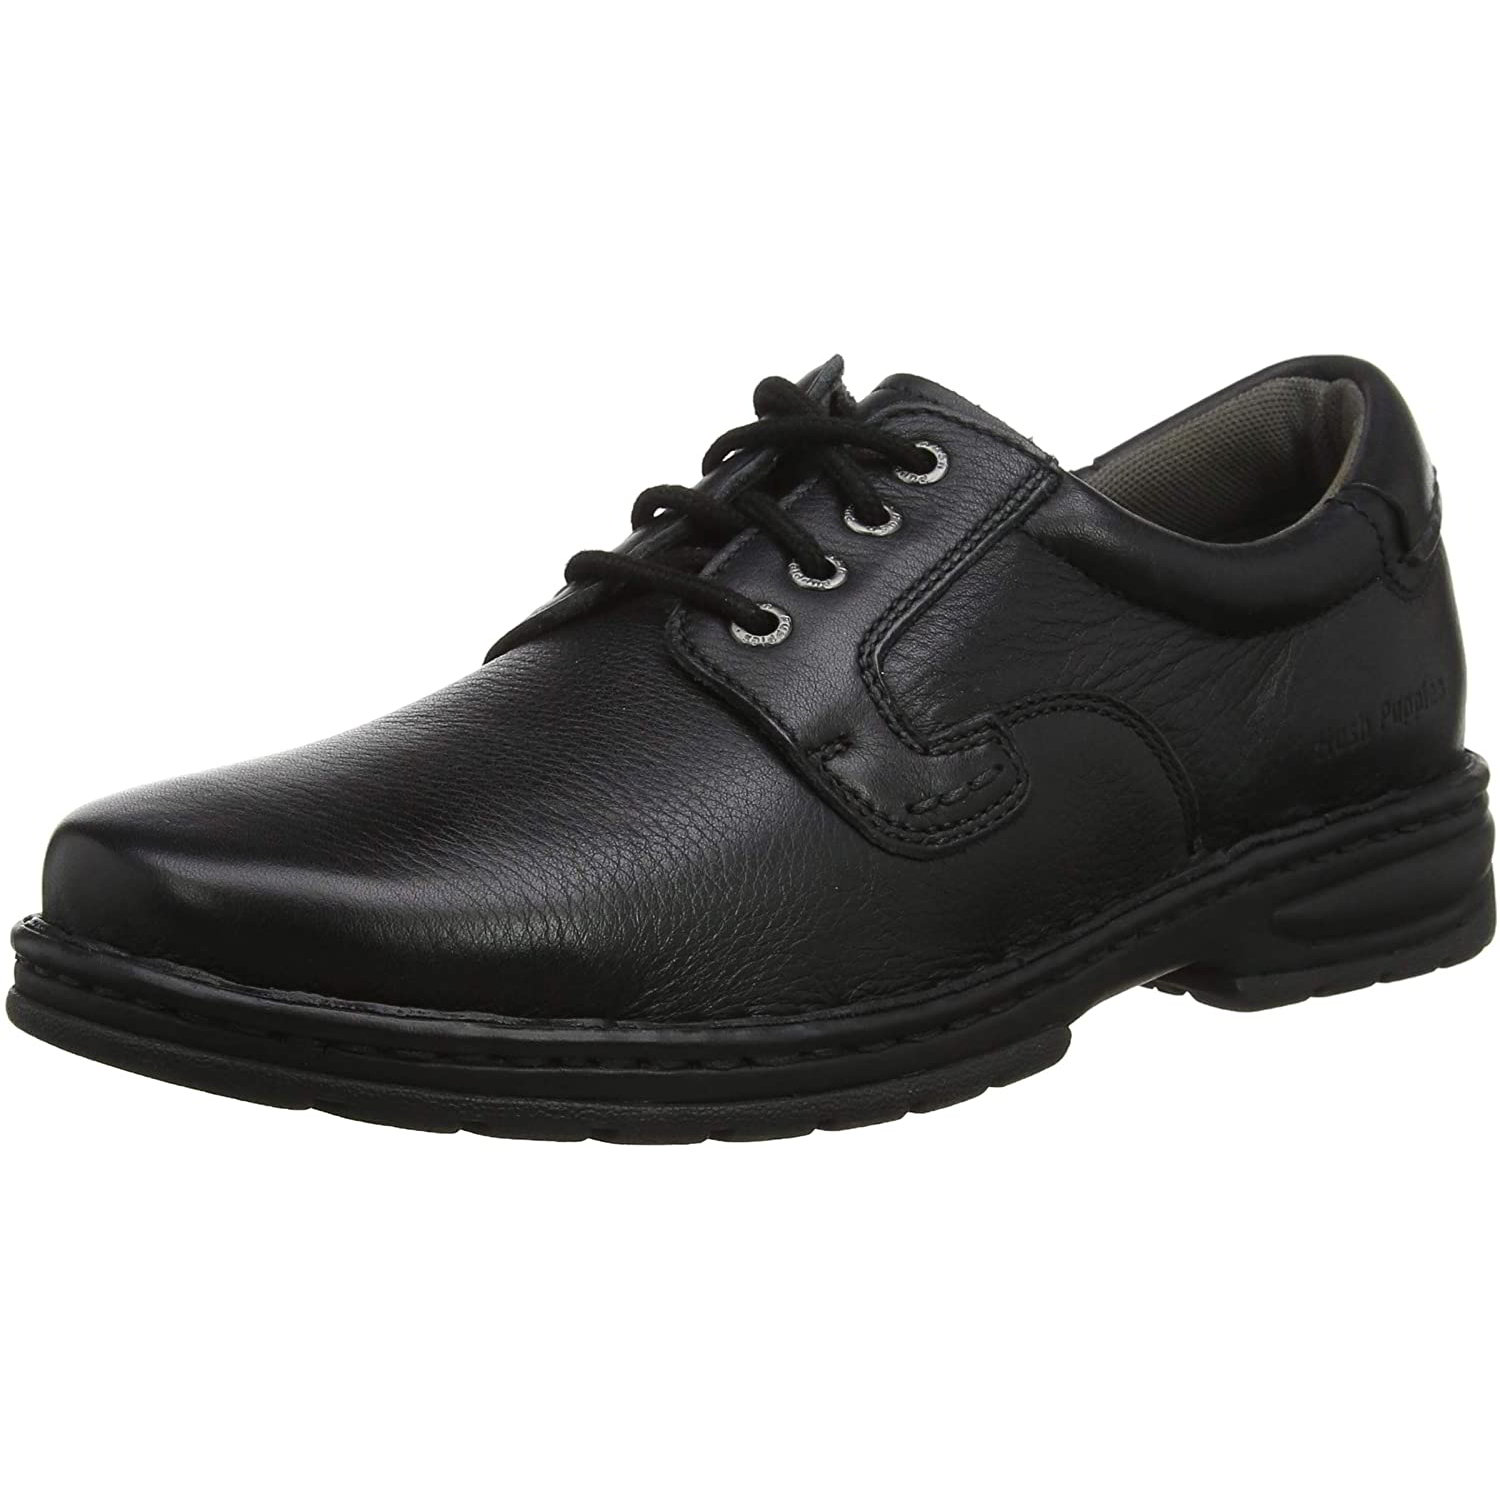 Hush Puppies Men's Outlaw II Wide Fit Shoes - UK 11